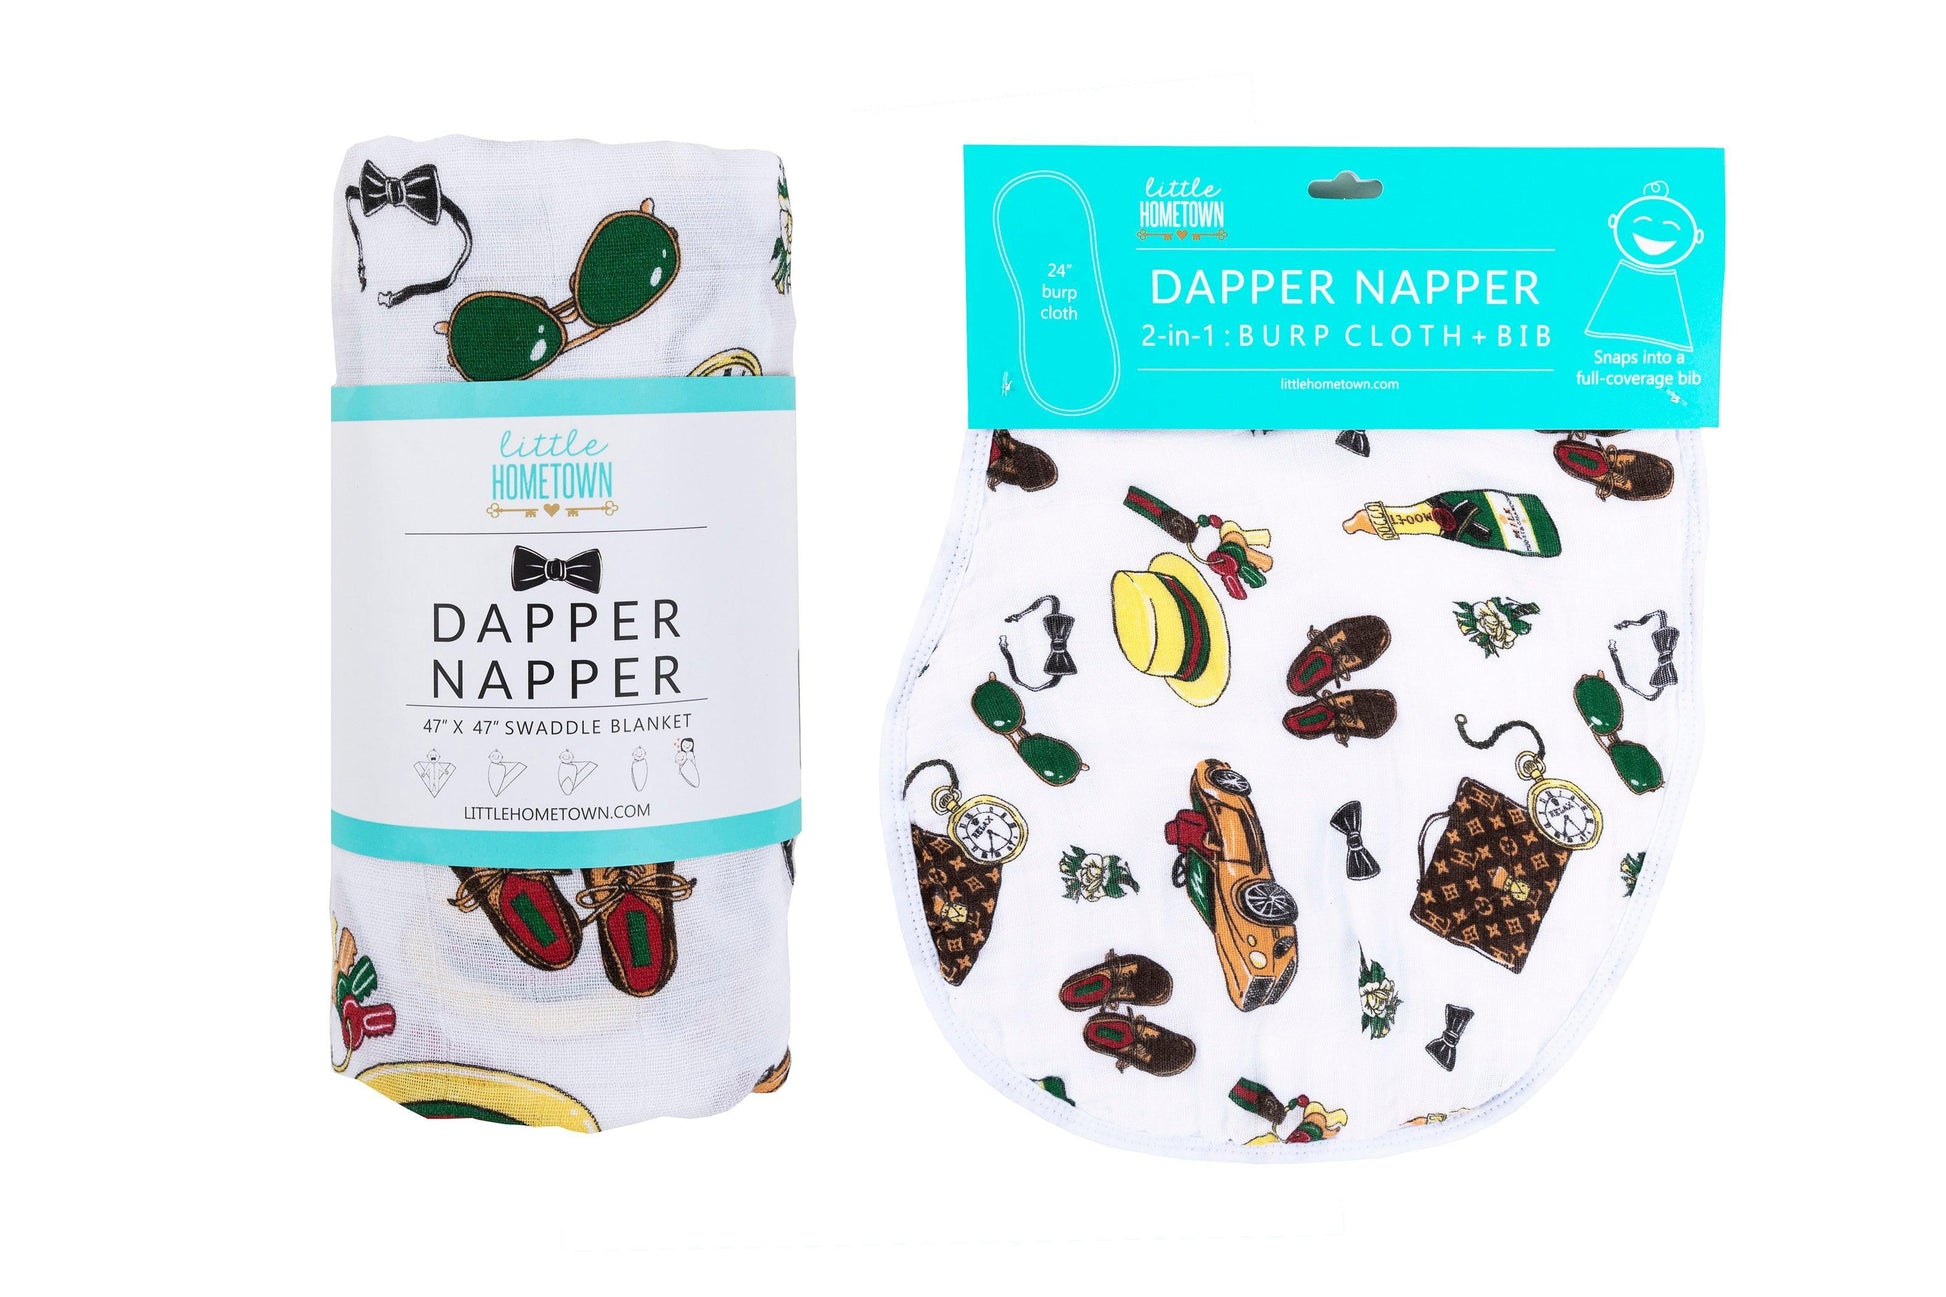 Gift set with a baby muslin swaddle blanket and burp cloth/bib combo in a charming dapper napper design.